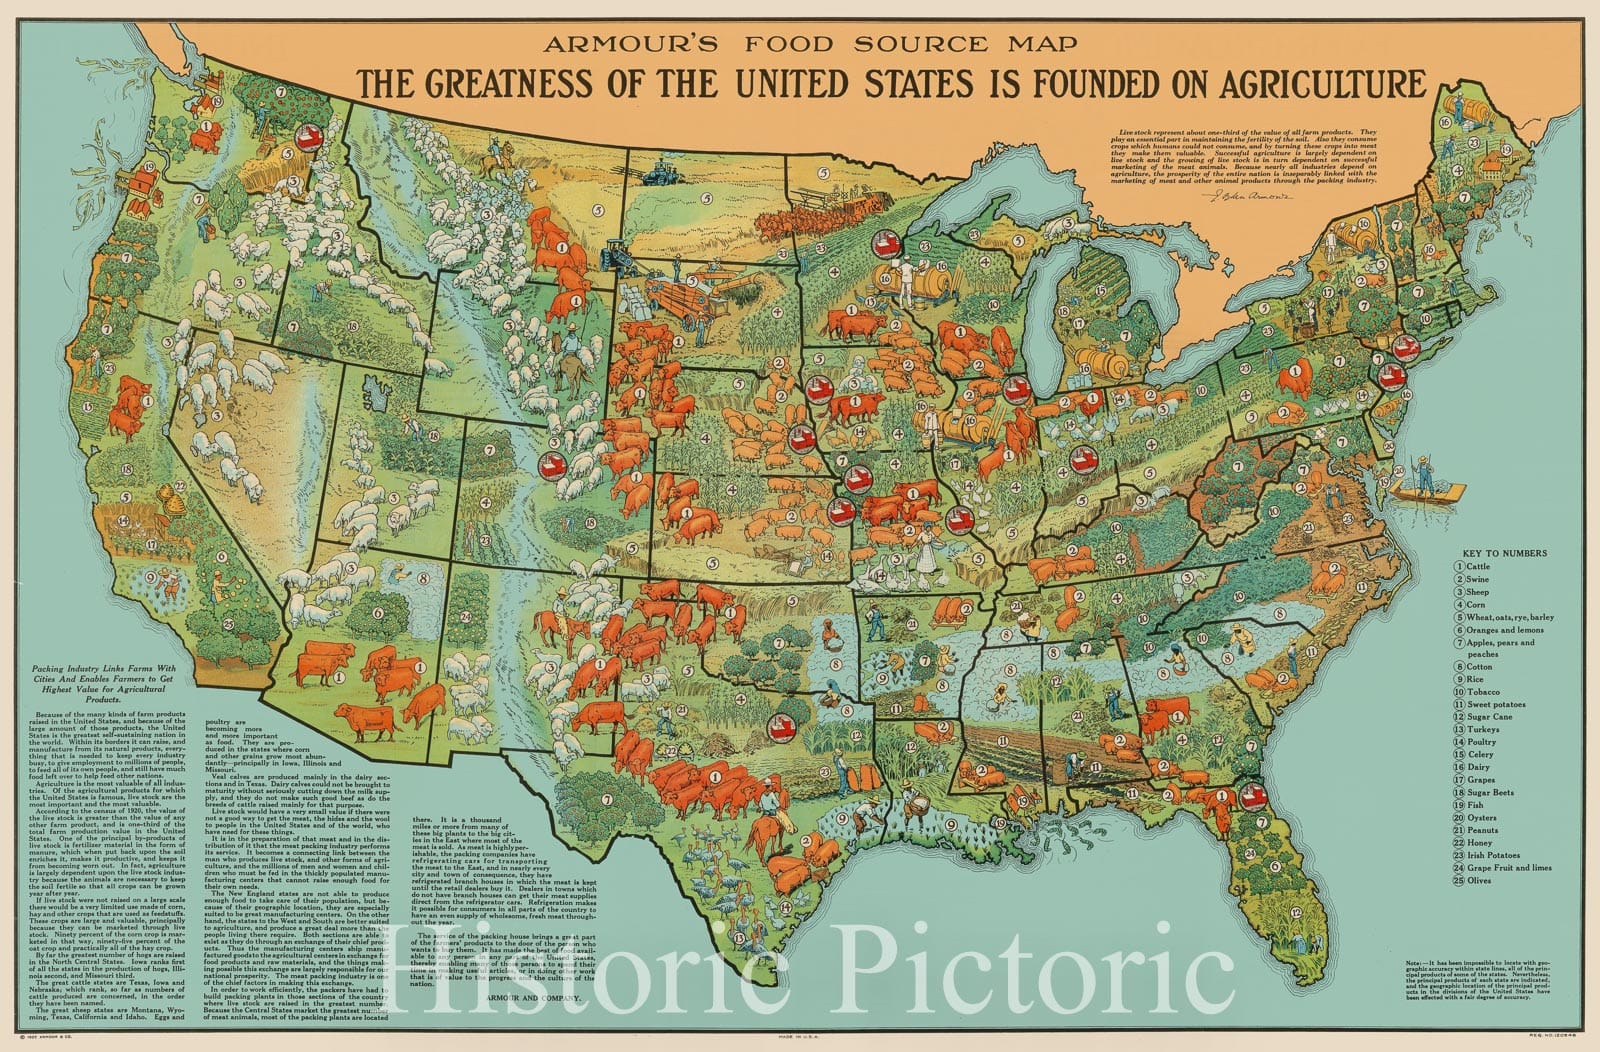 Historic Map - Armour's Food Source Map The Greatness of the United States is Founded on Agriculture, 1922, Armour & Co. v2